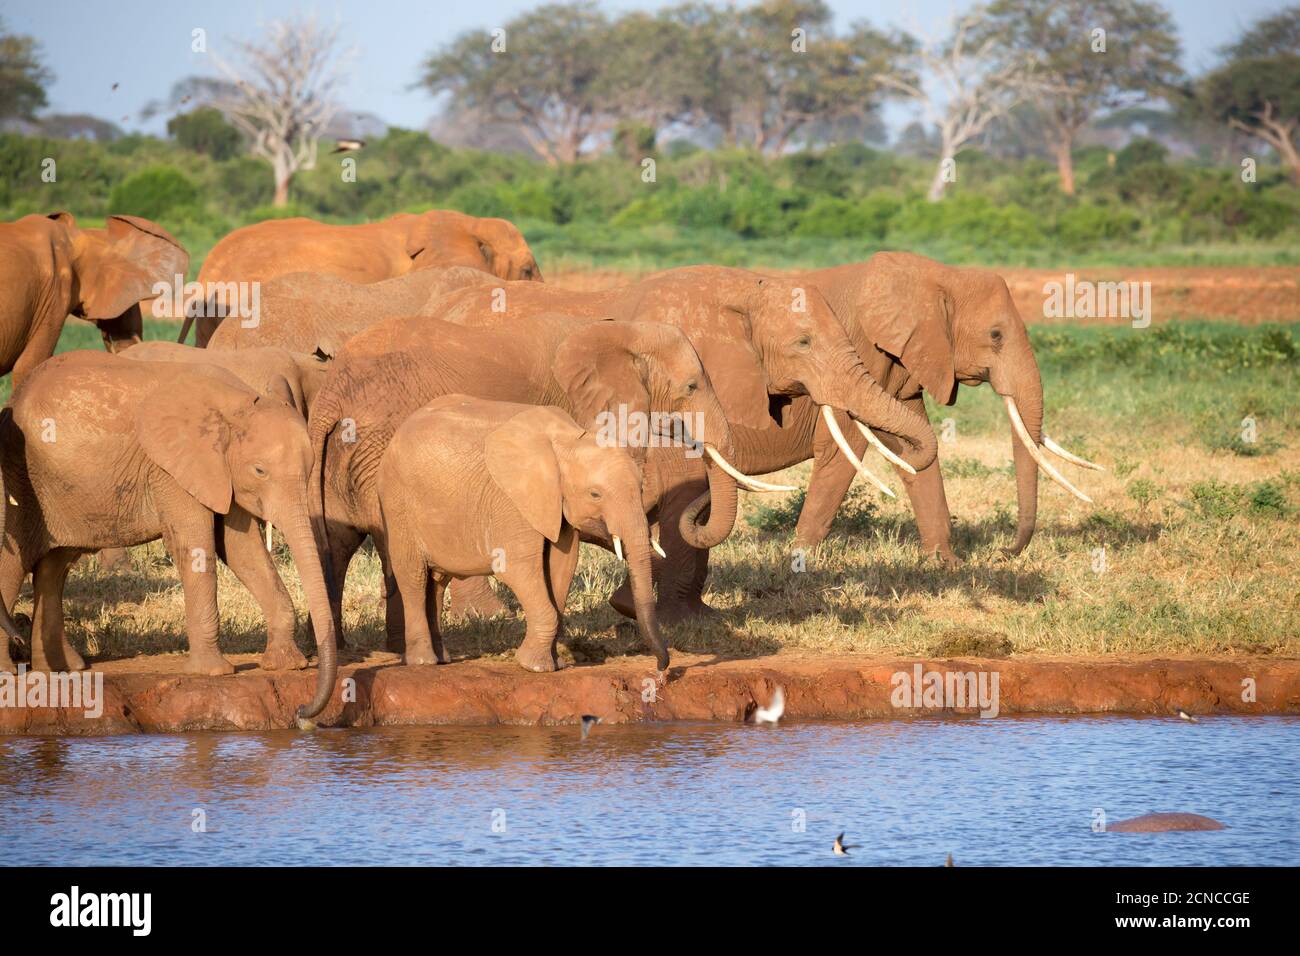 A family of red elephants at a water hole in the middle of the savannah Stock Photo